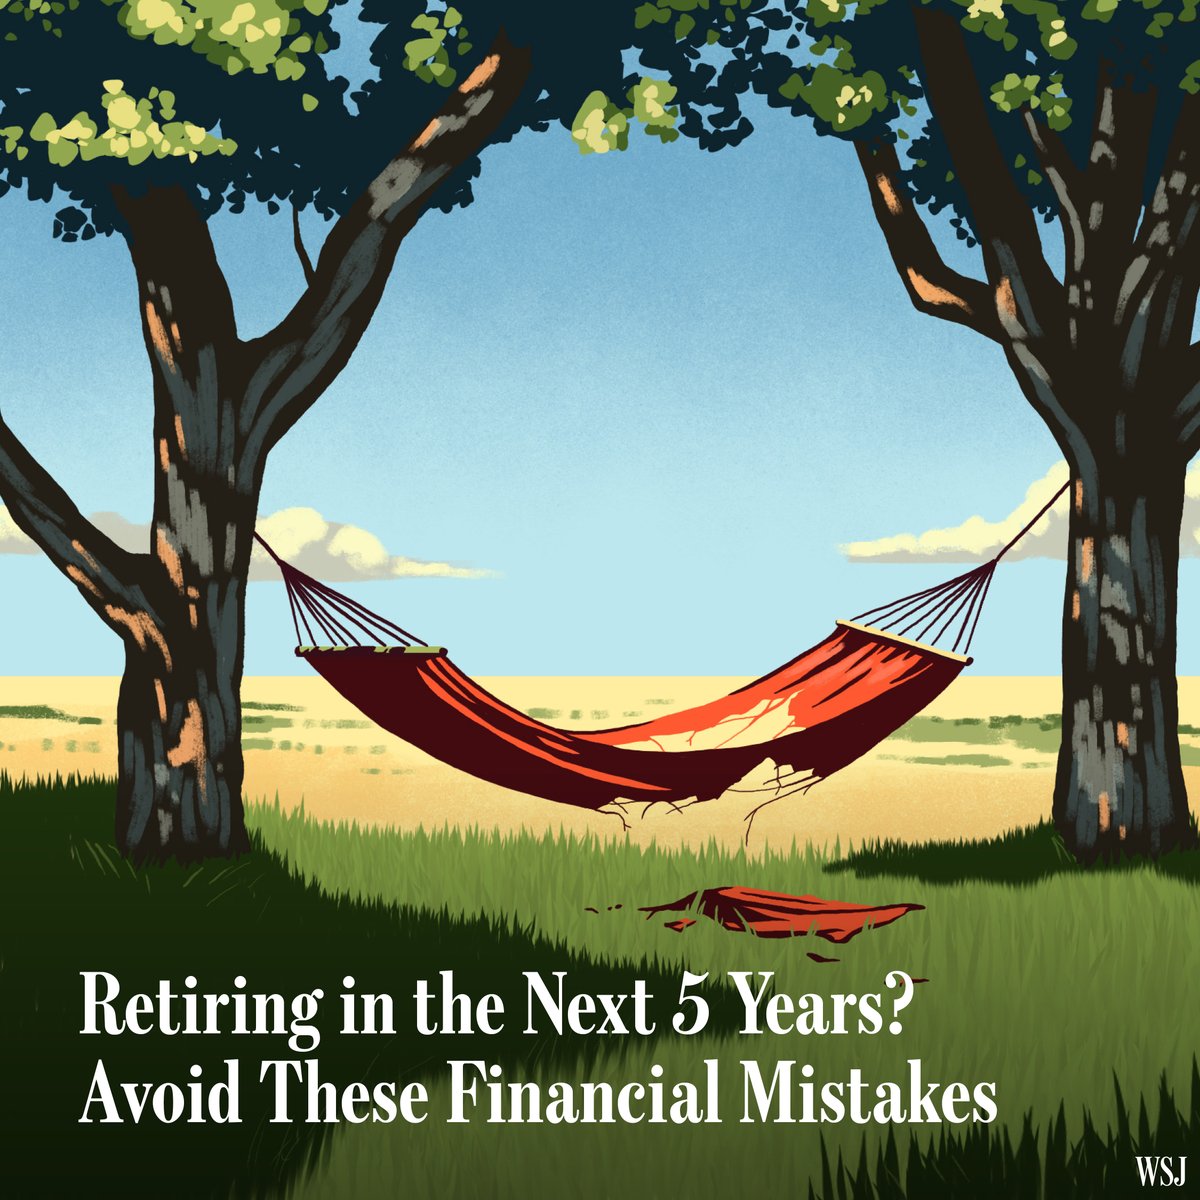 The last few years before retirement can make or break what comes next. If you're planning to retire soon, avoid these six common financial mistakes that can quickly—and permanently—derail your plans. 🔗on.wsj.com/3K1vwKr